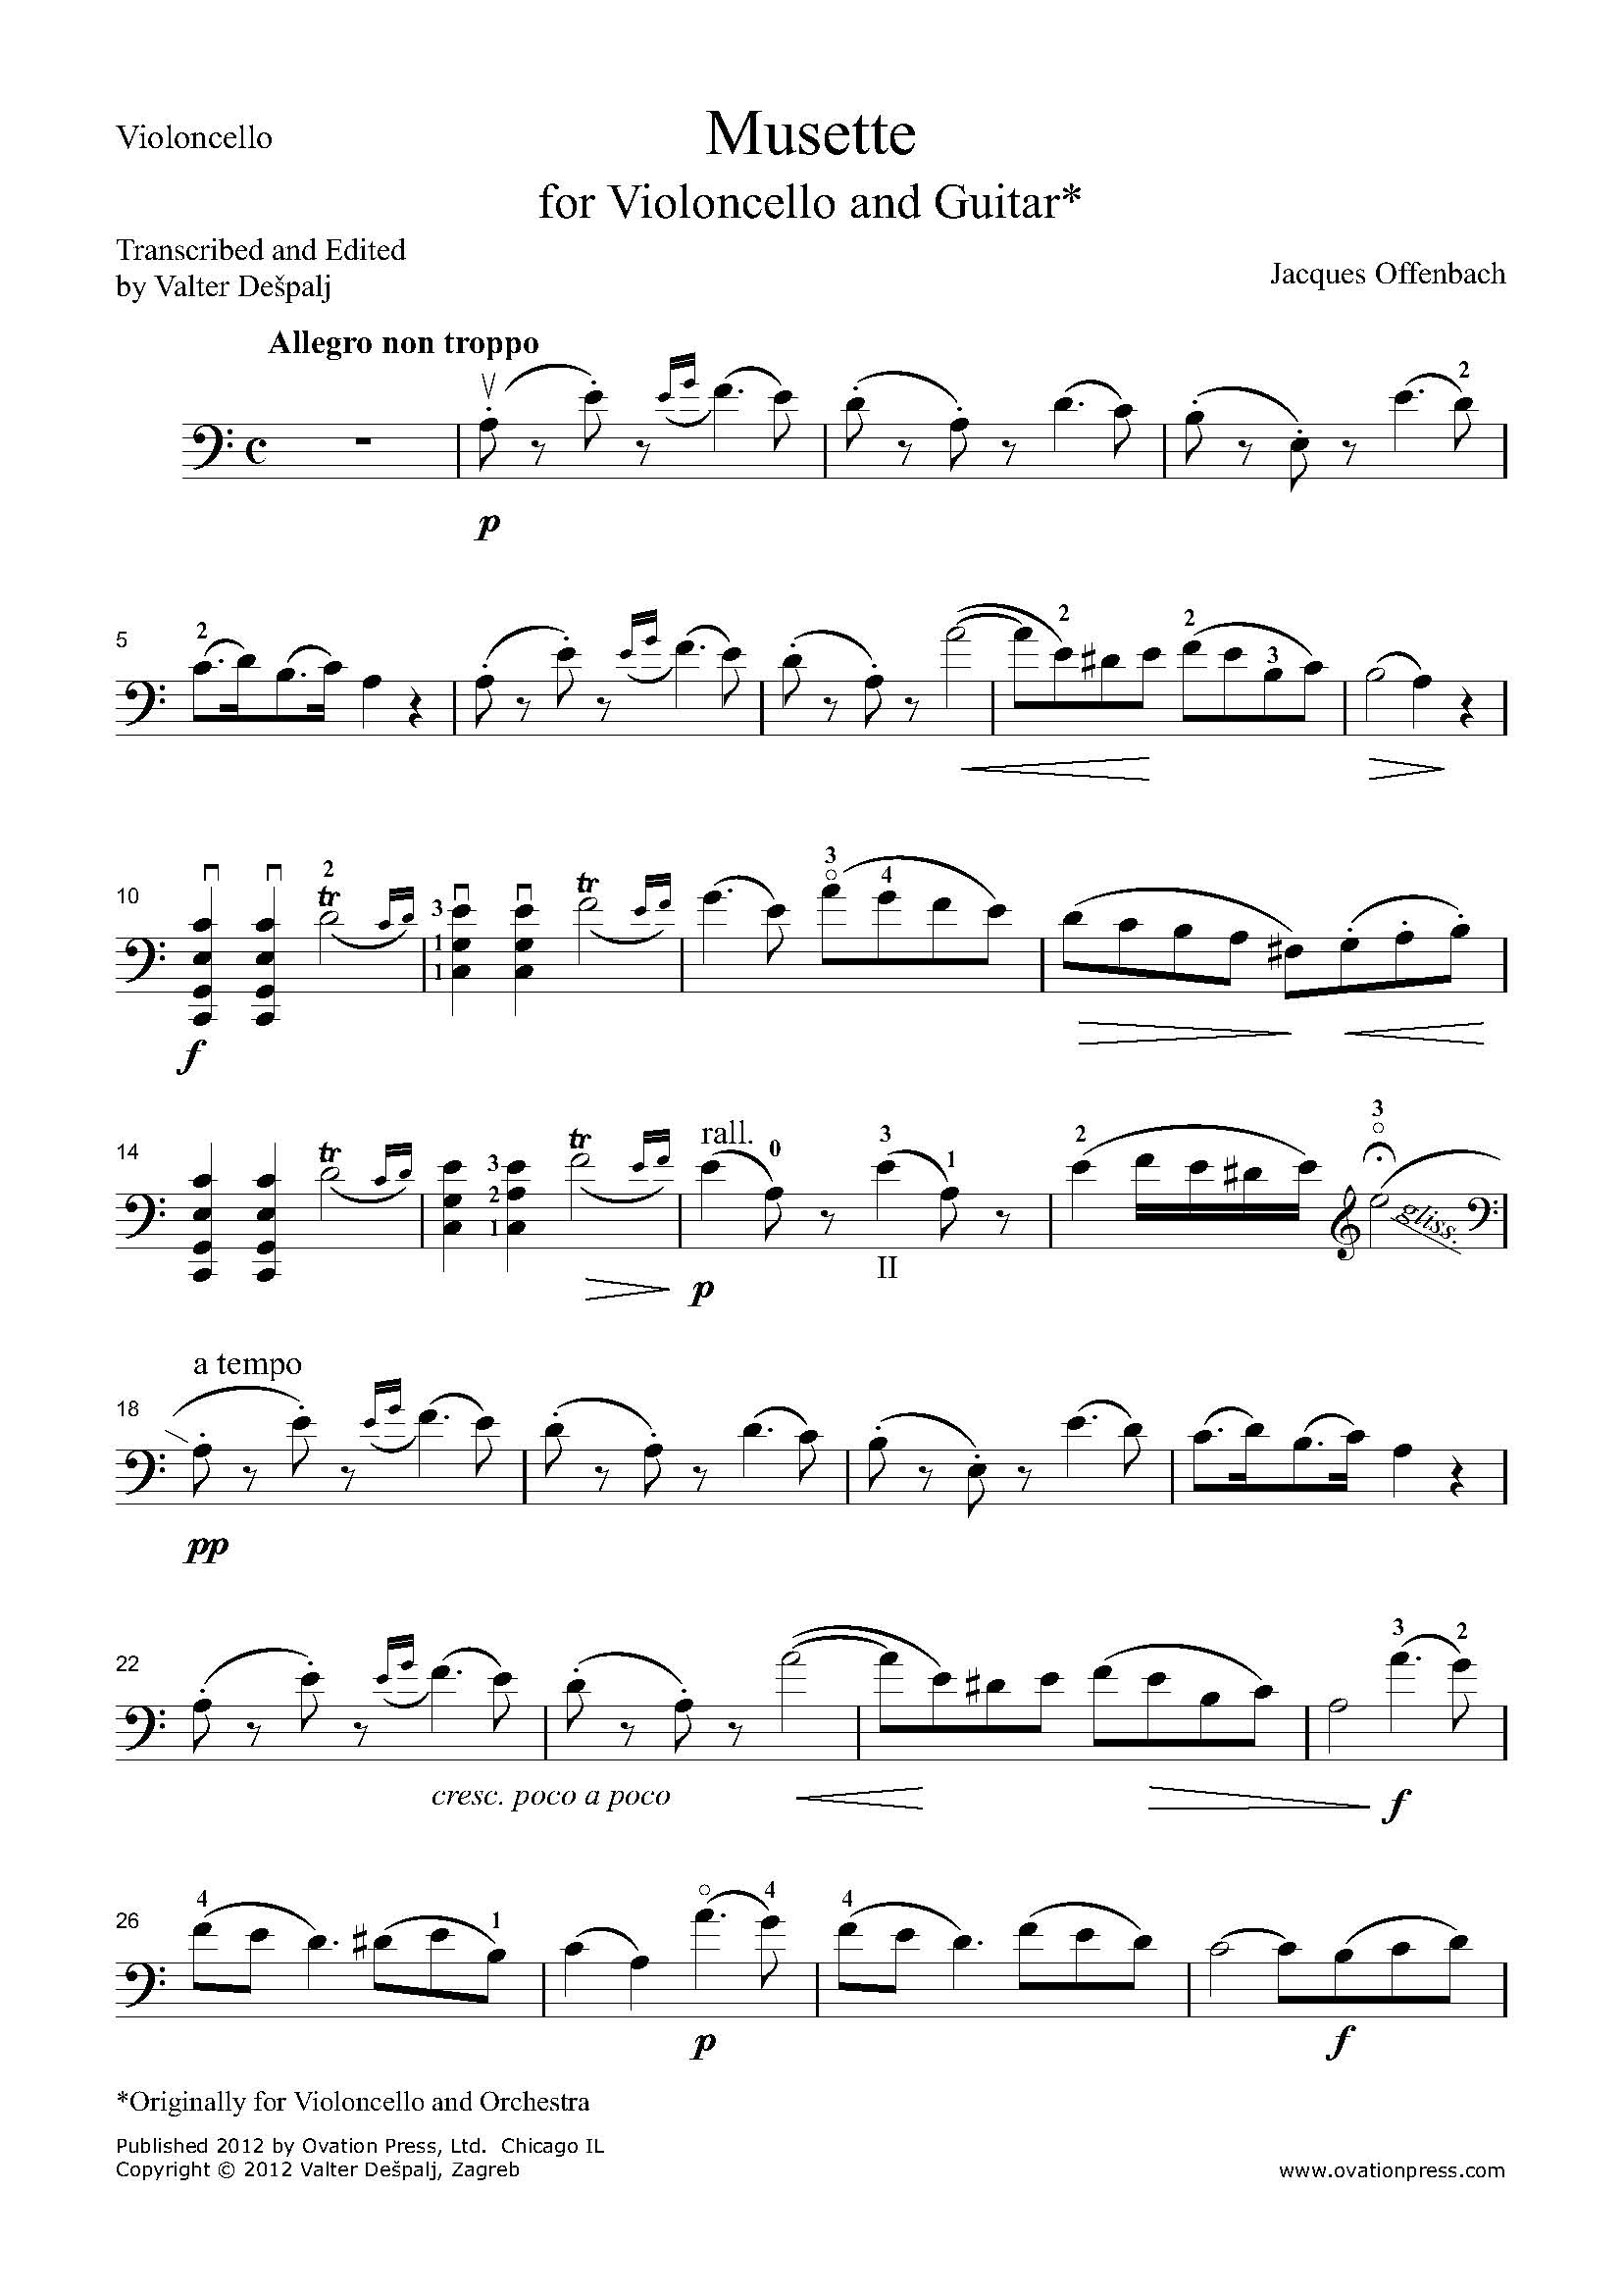 Offenbach Musette Transcribed for Cello and Guitar